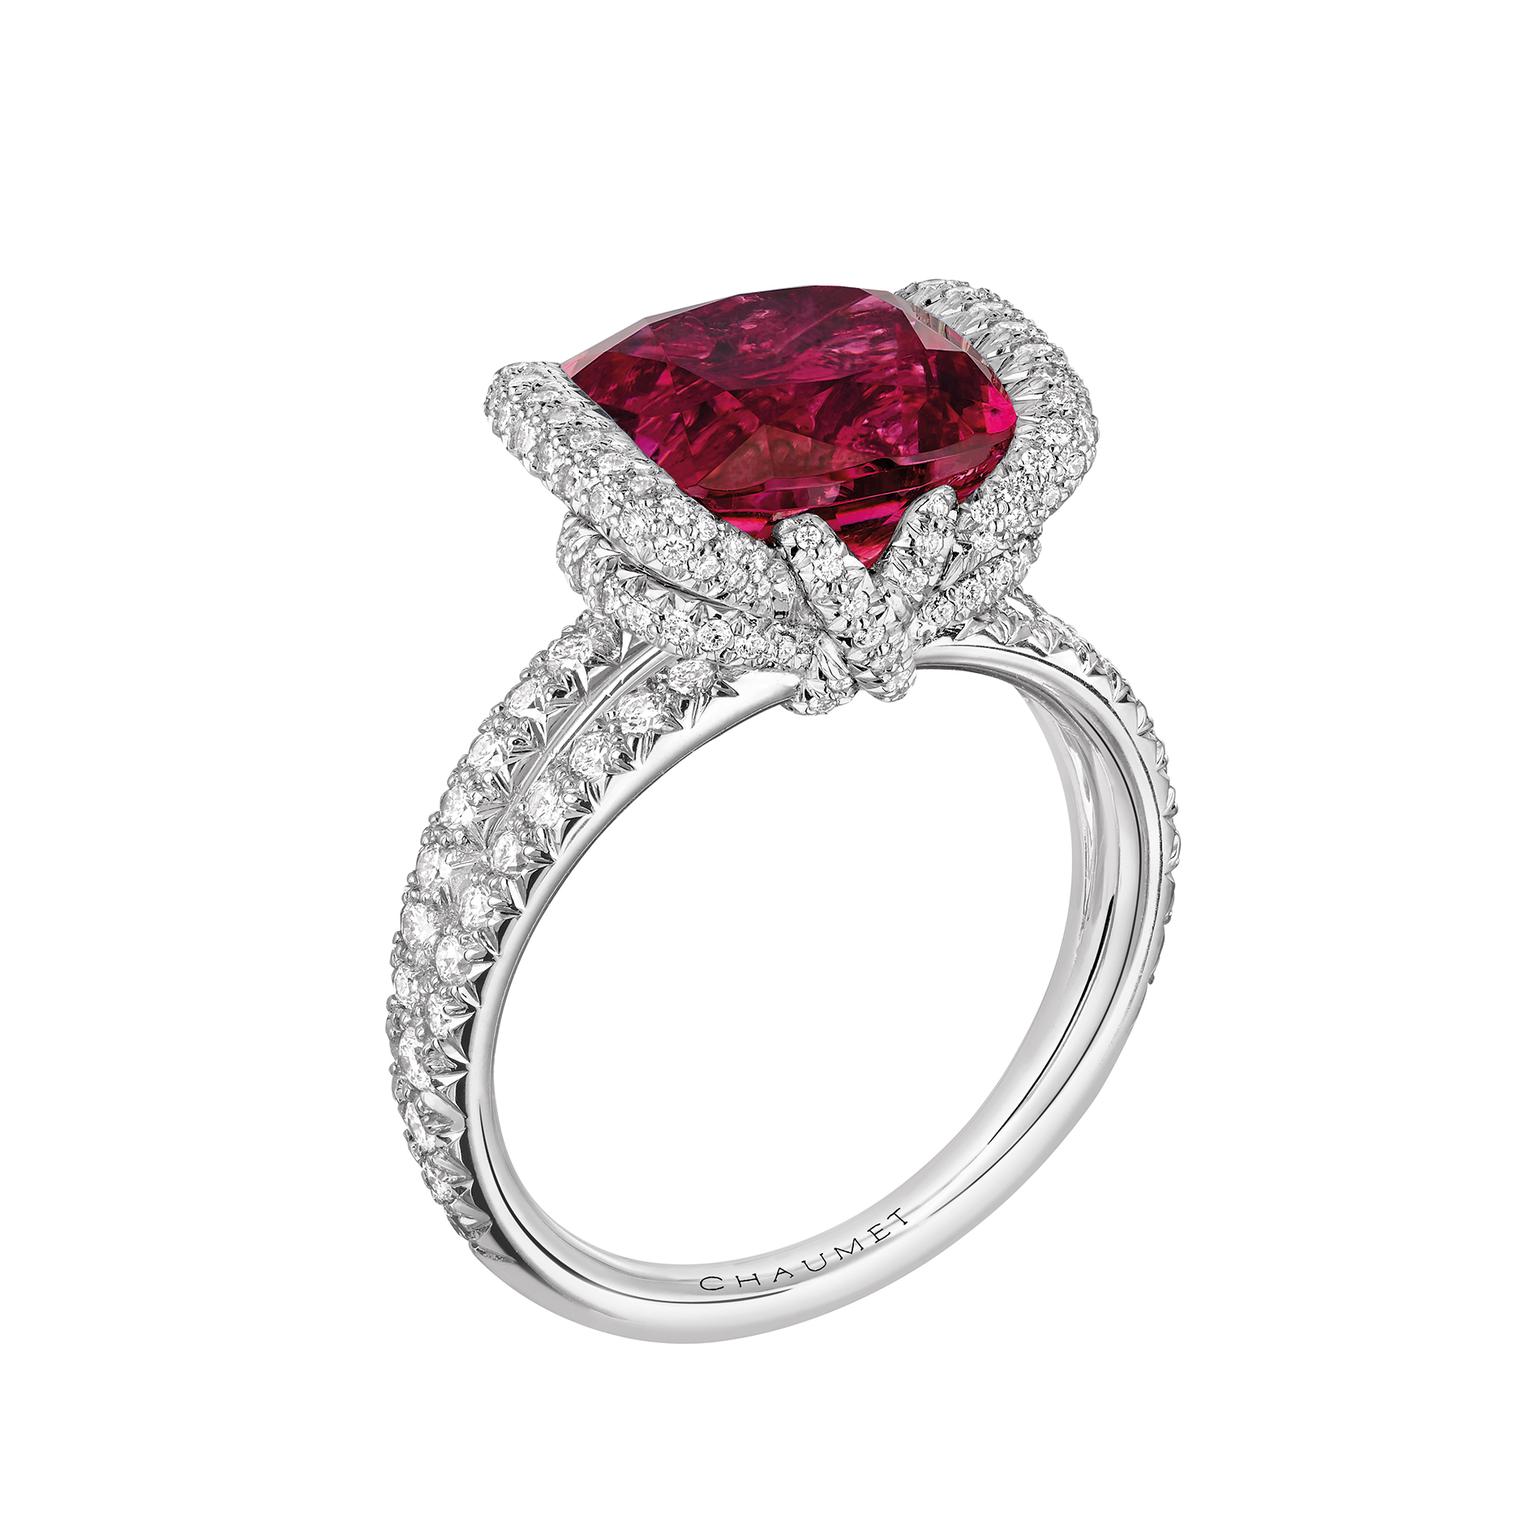 Chaumet Liens d'Amour red tourmaline ring